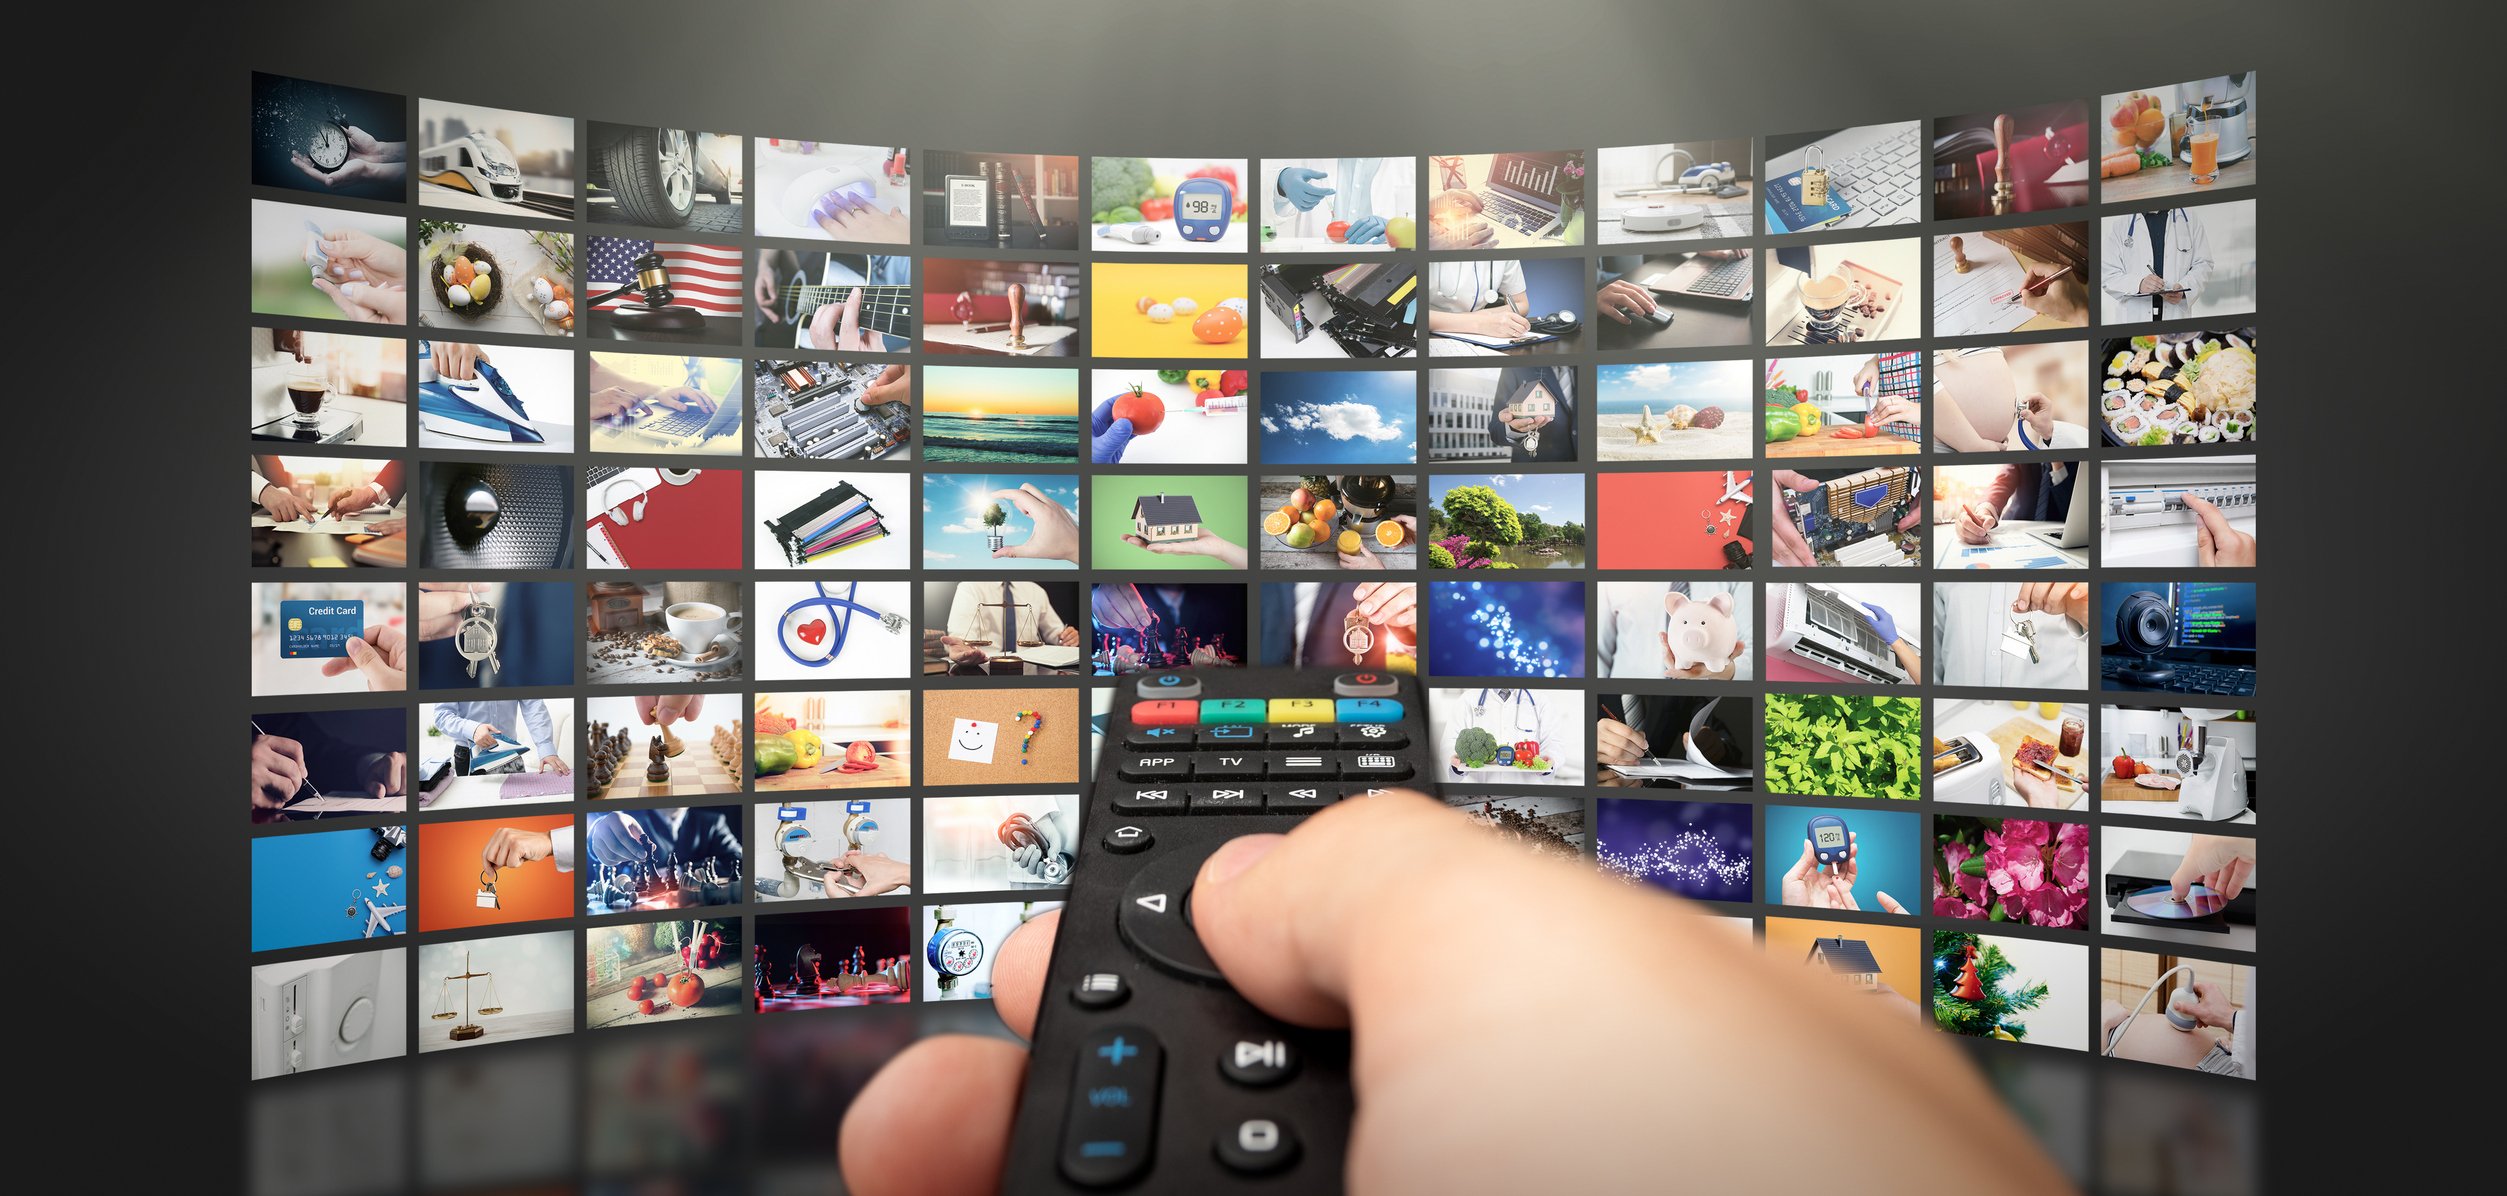 TV remote  Getty Images